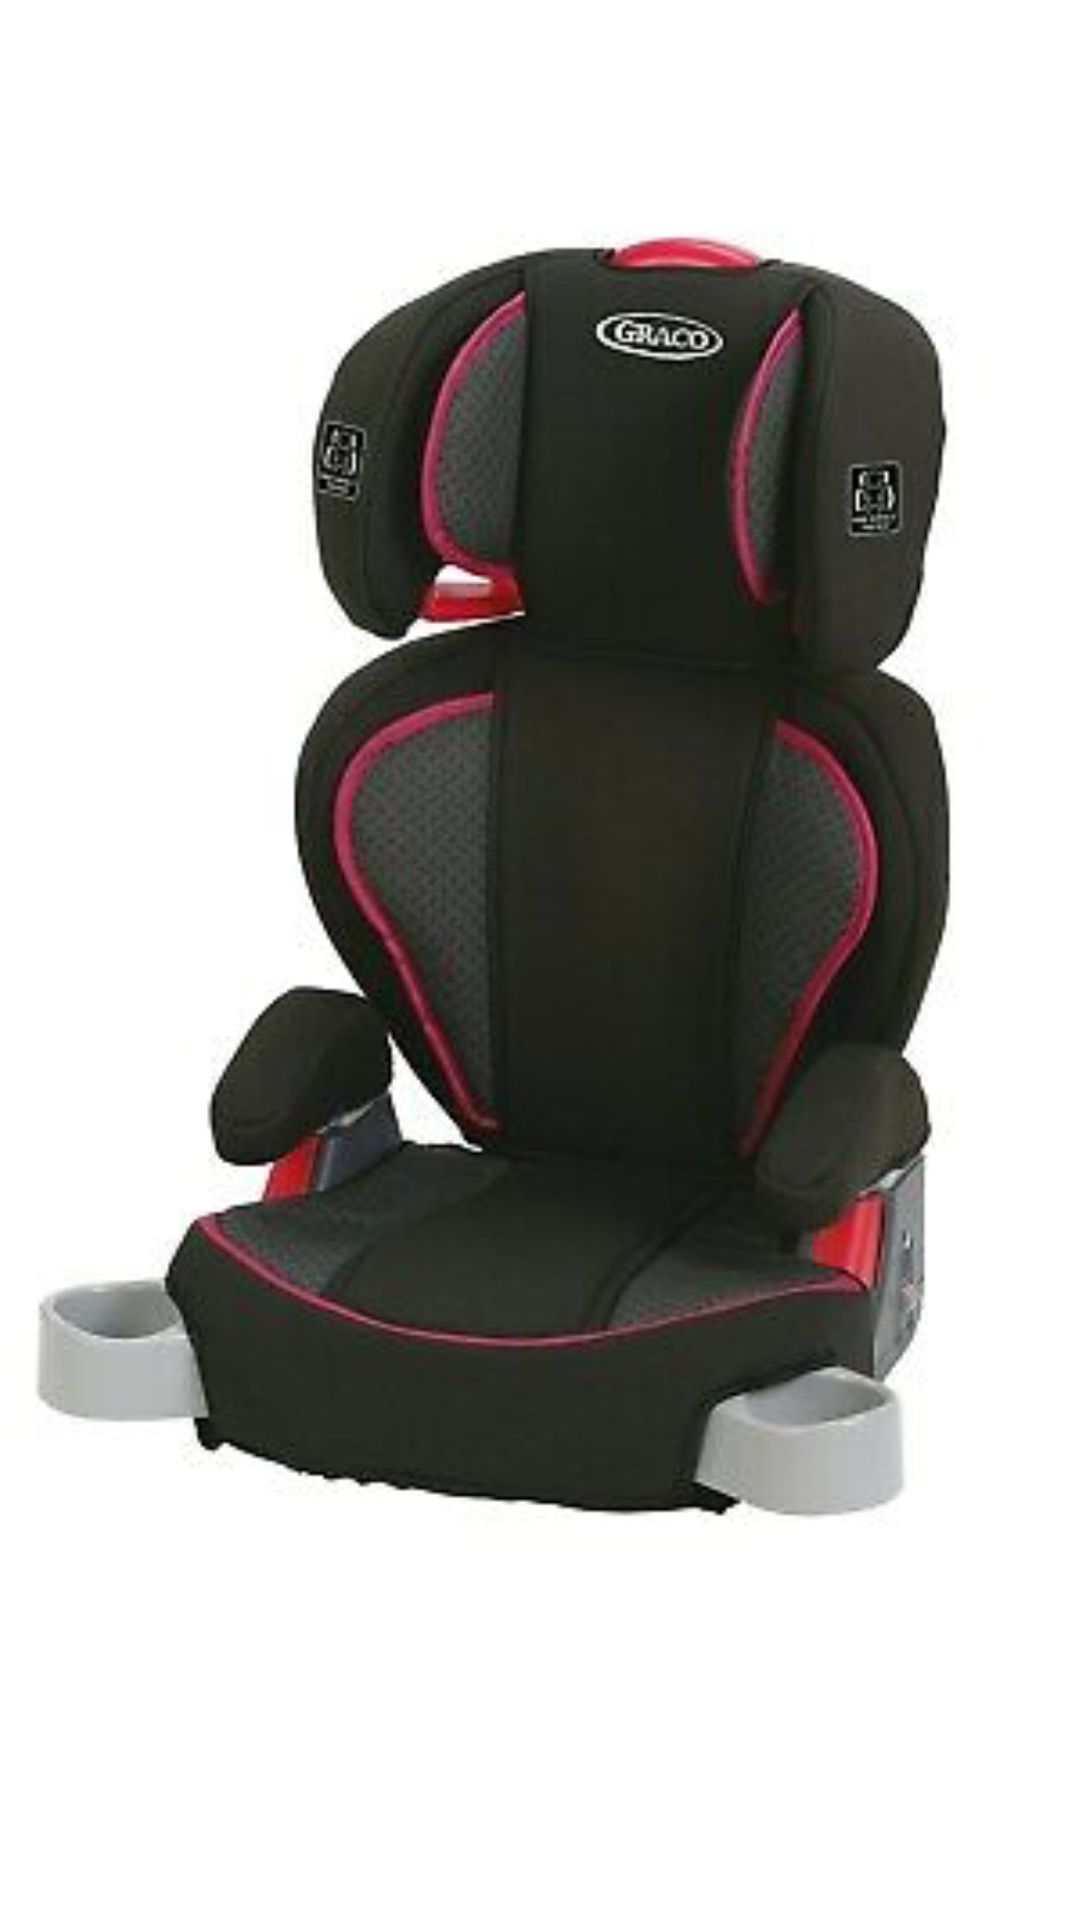 Graco booster seat with removable back